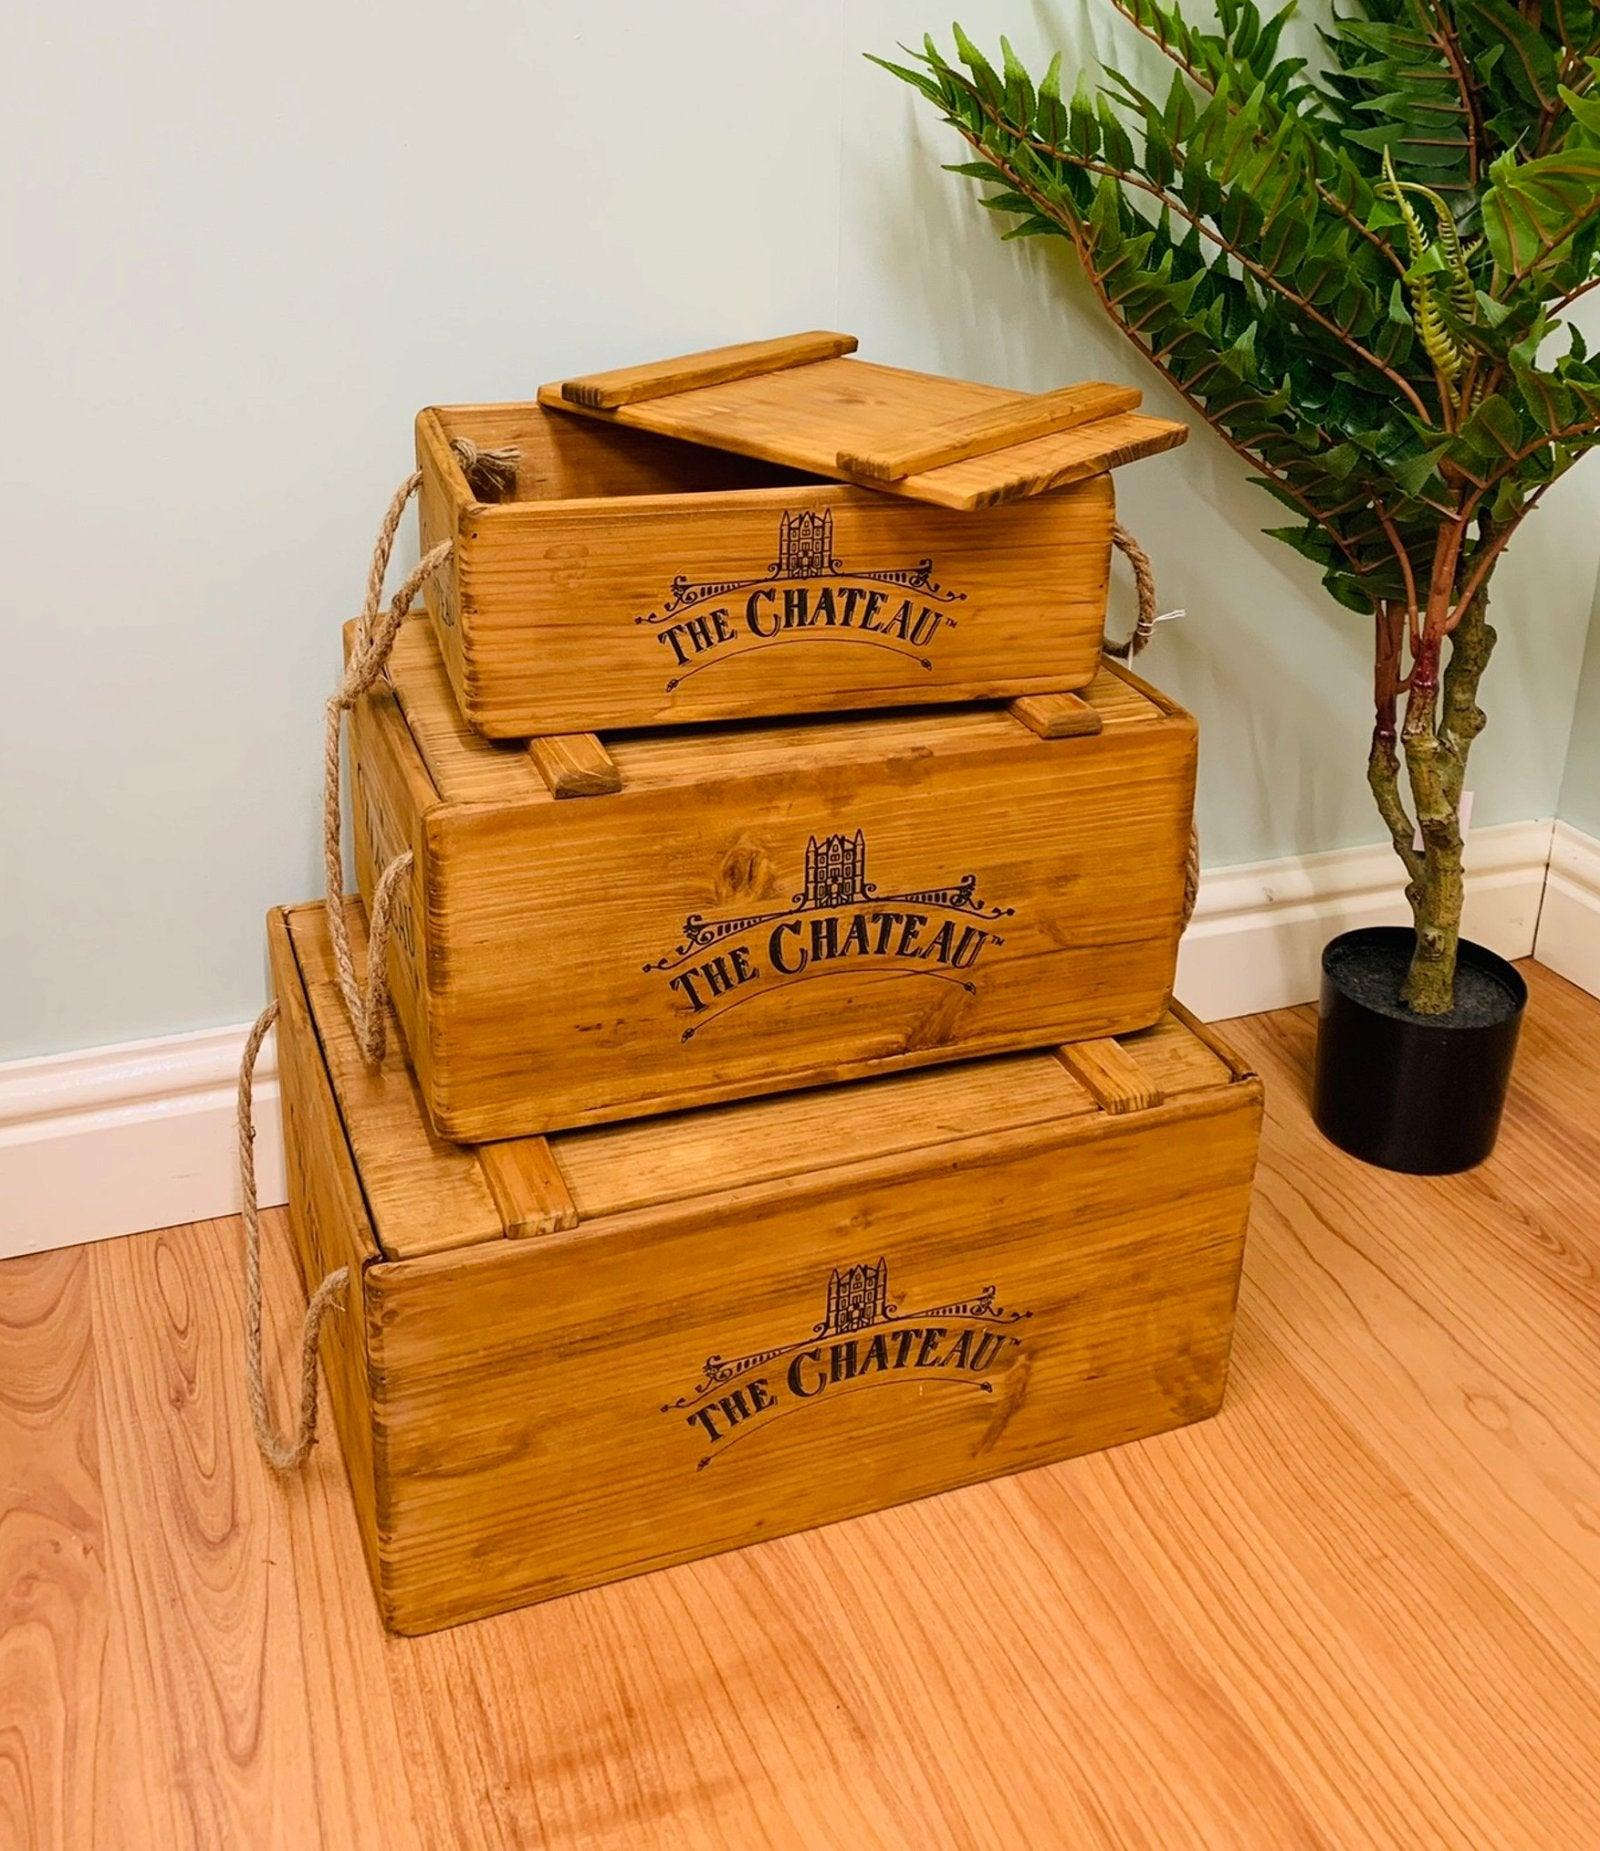 View Set Of 3 The Chateau Rustic Vintage Crates information